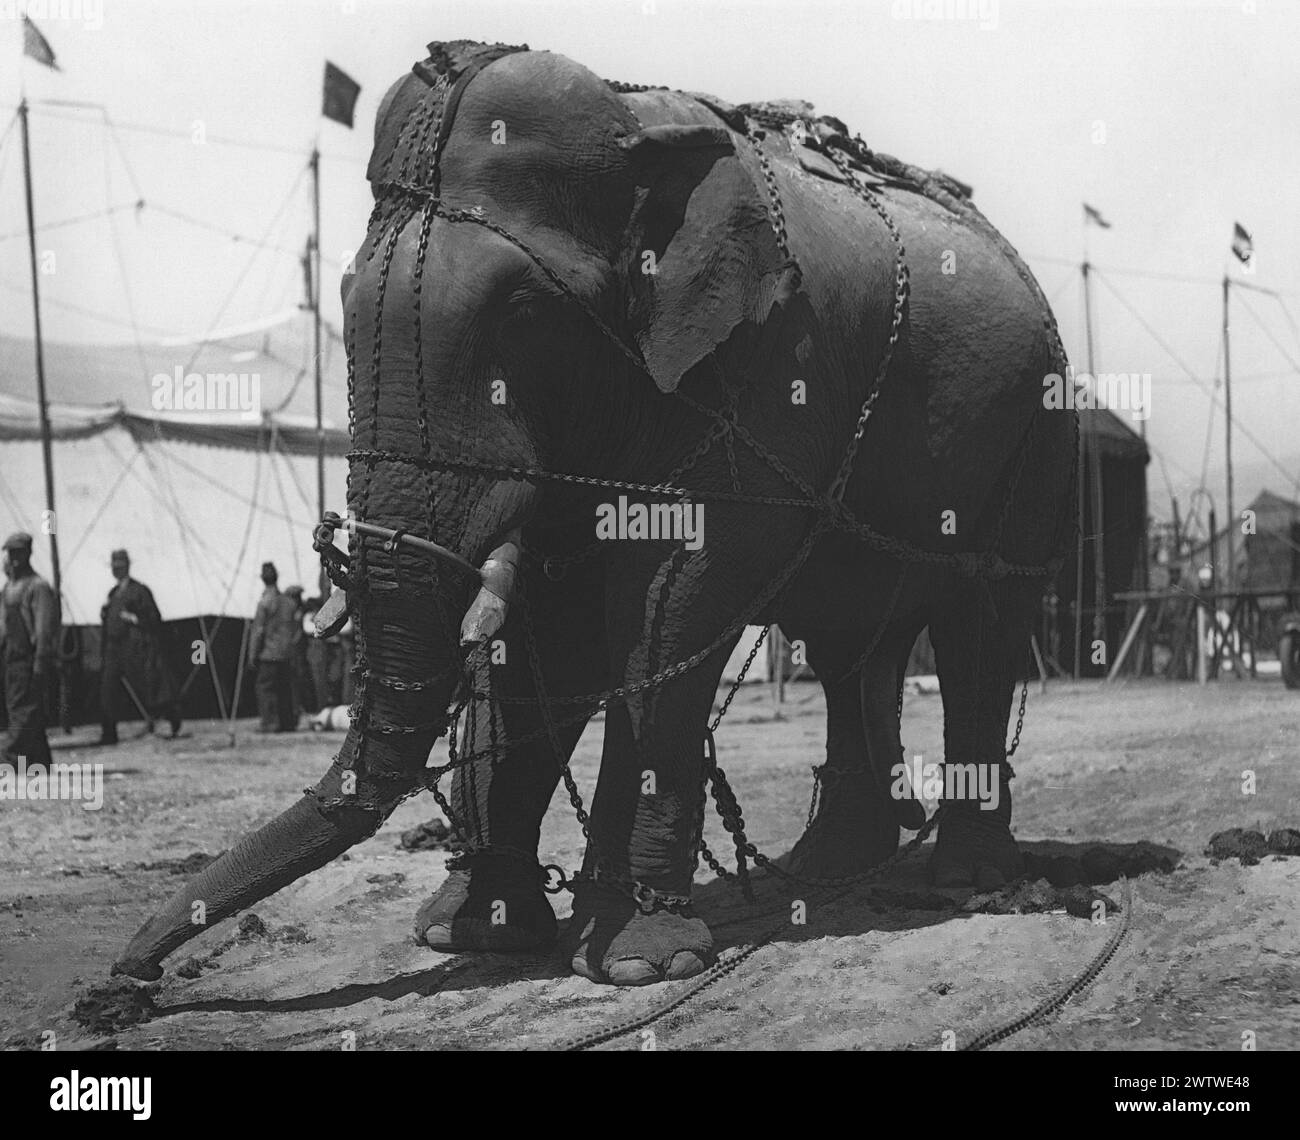 1930s CIRCUS ELEPHANT DRAPED IN CHAINS Stock Photo